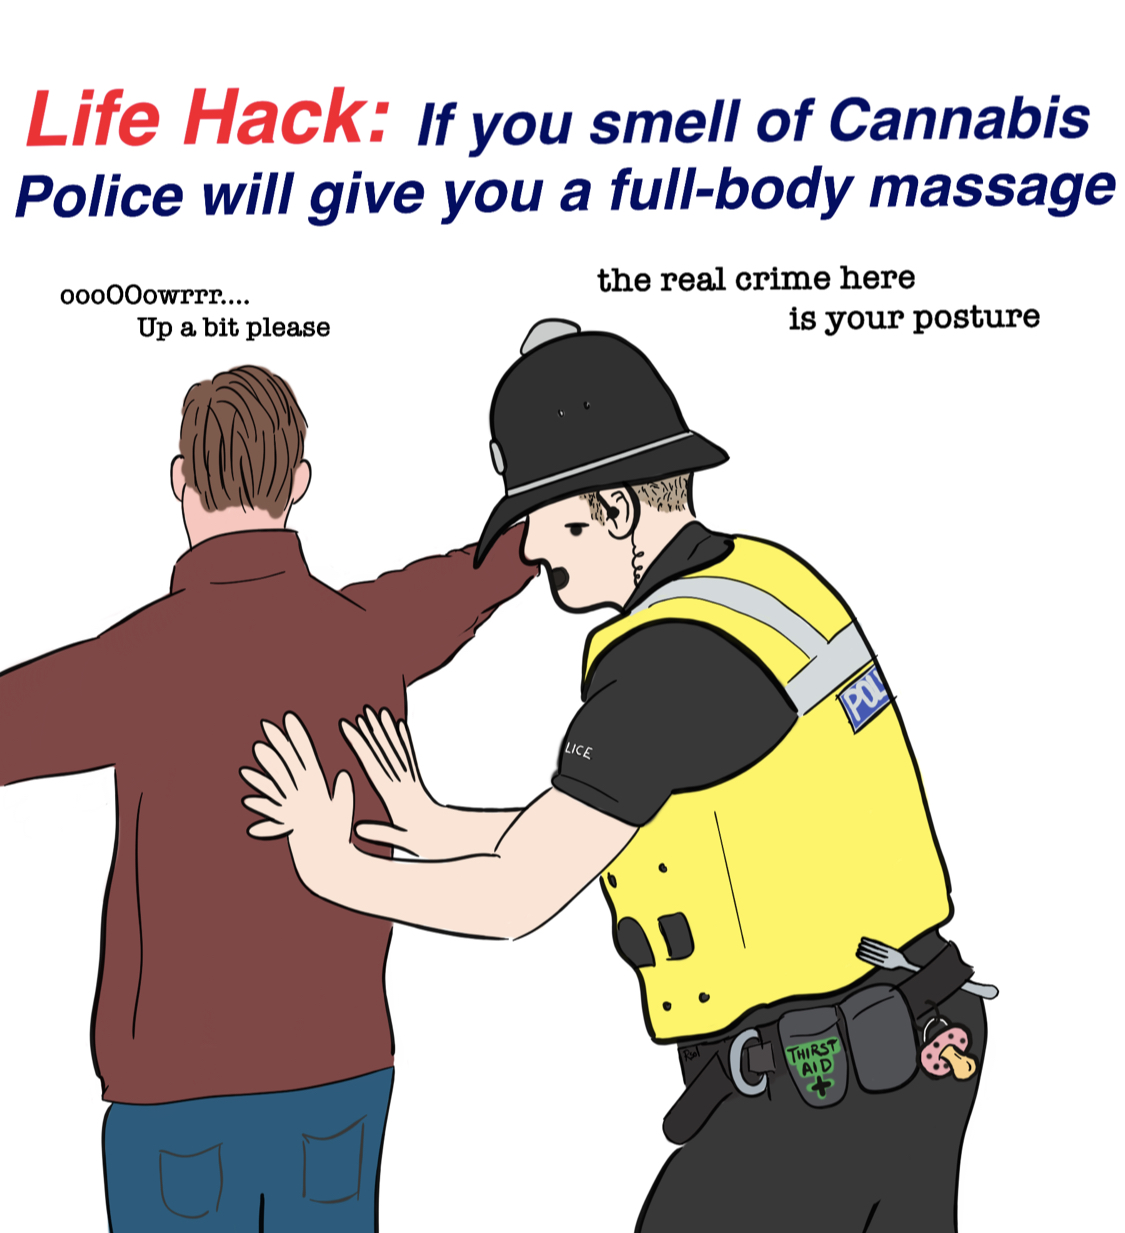 funny office signs - Life Hack If you smell of Cannabis Police will give you a fullbody massage 00000owrrr.... Up a bit please the real crime here is your posture C